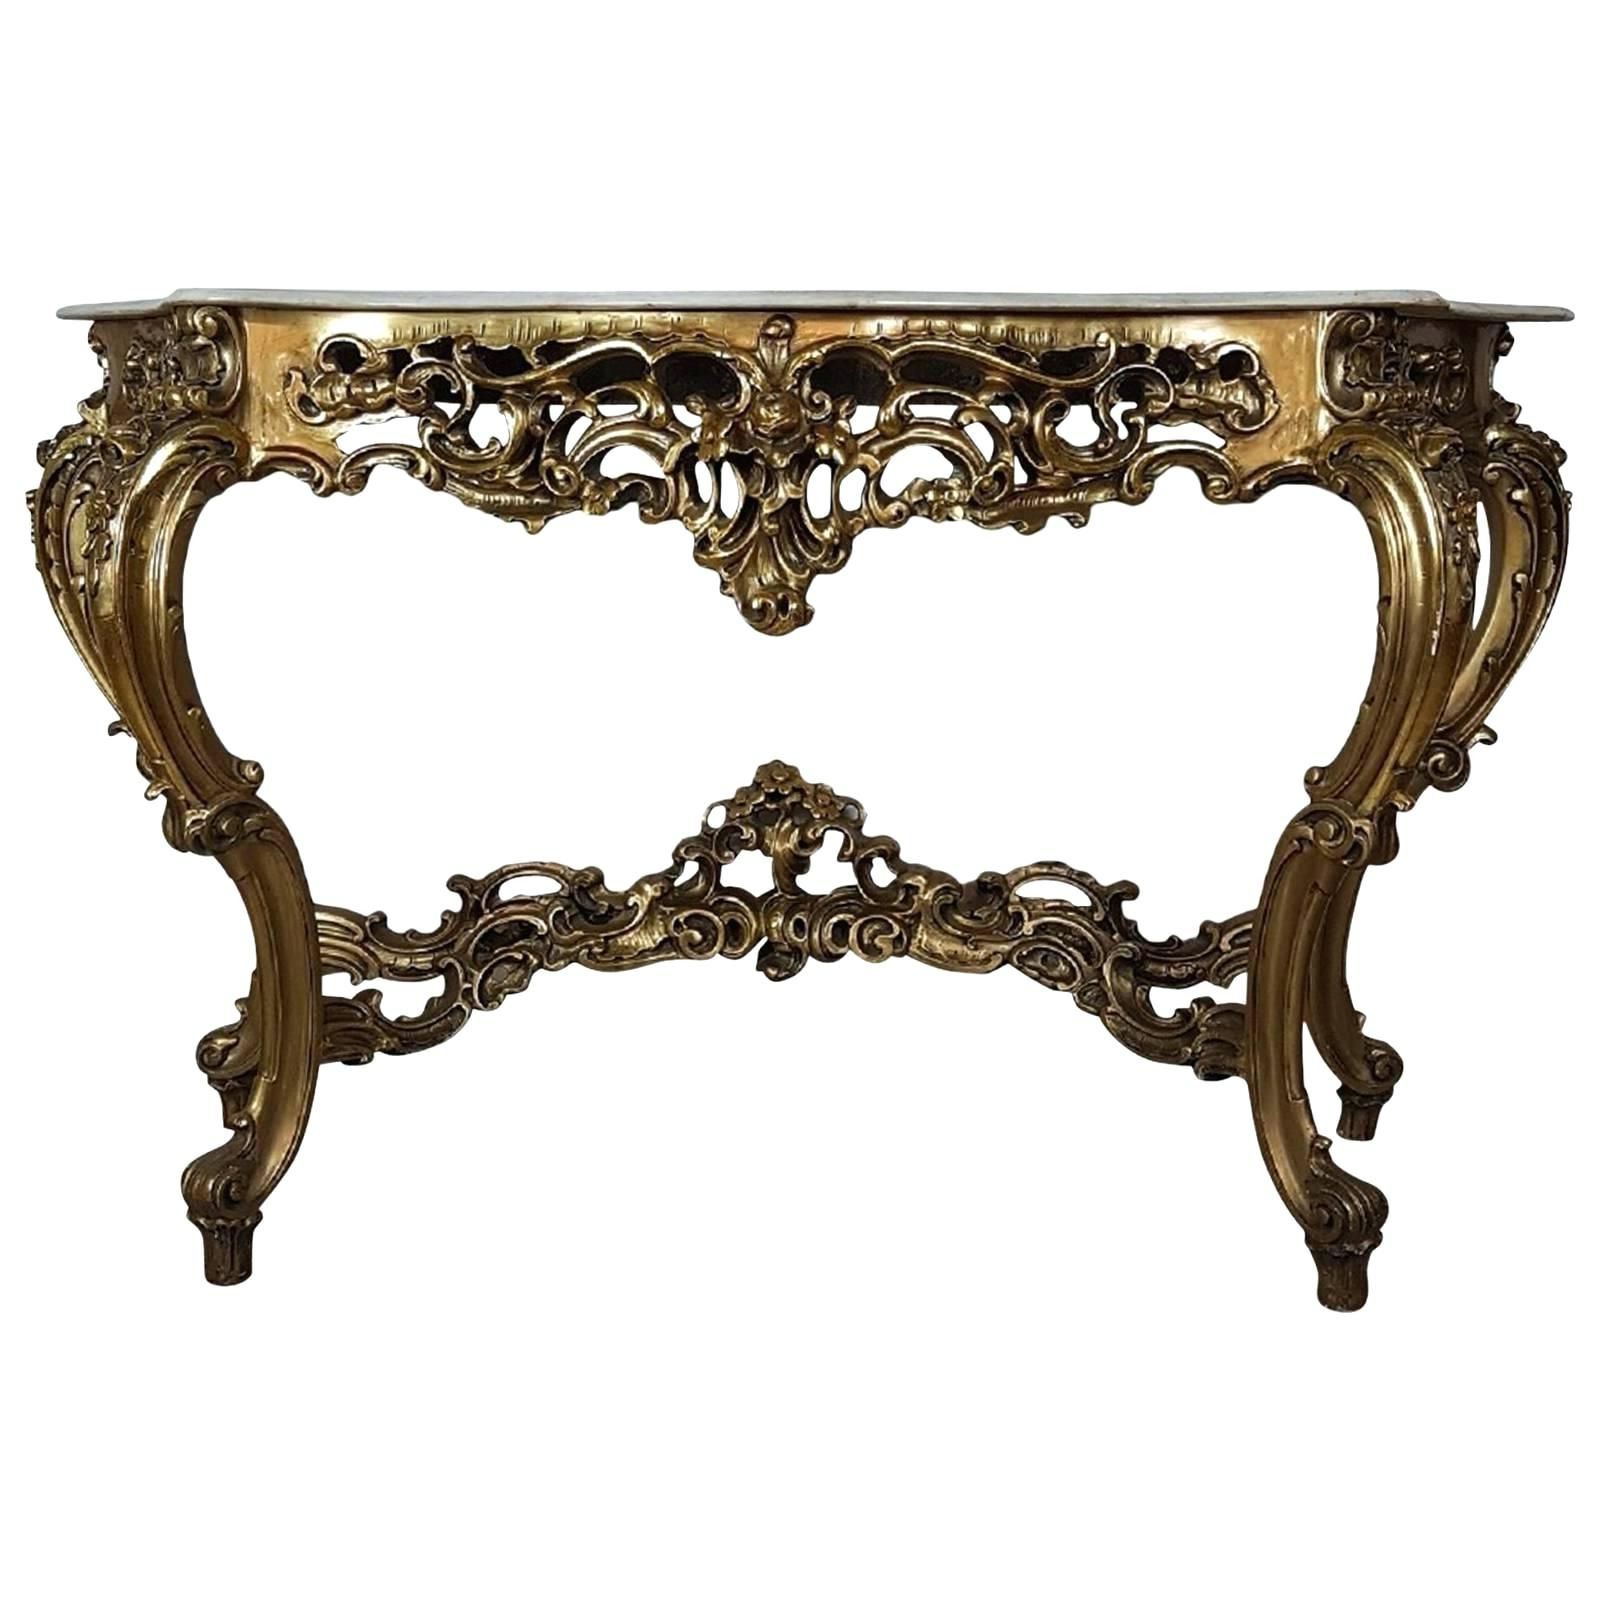 Most Popular Carved Console Table Xv Carved Console Table Indian Carved Console With Balboa Carved Console Tables (View 12 of 20)